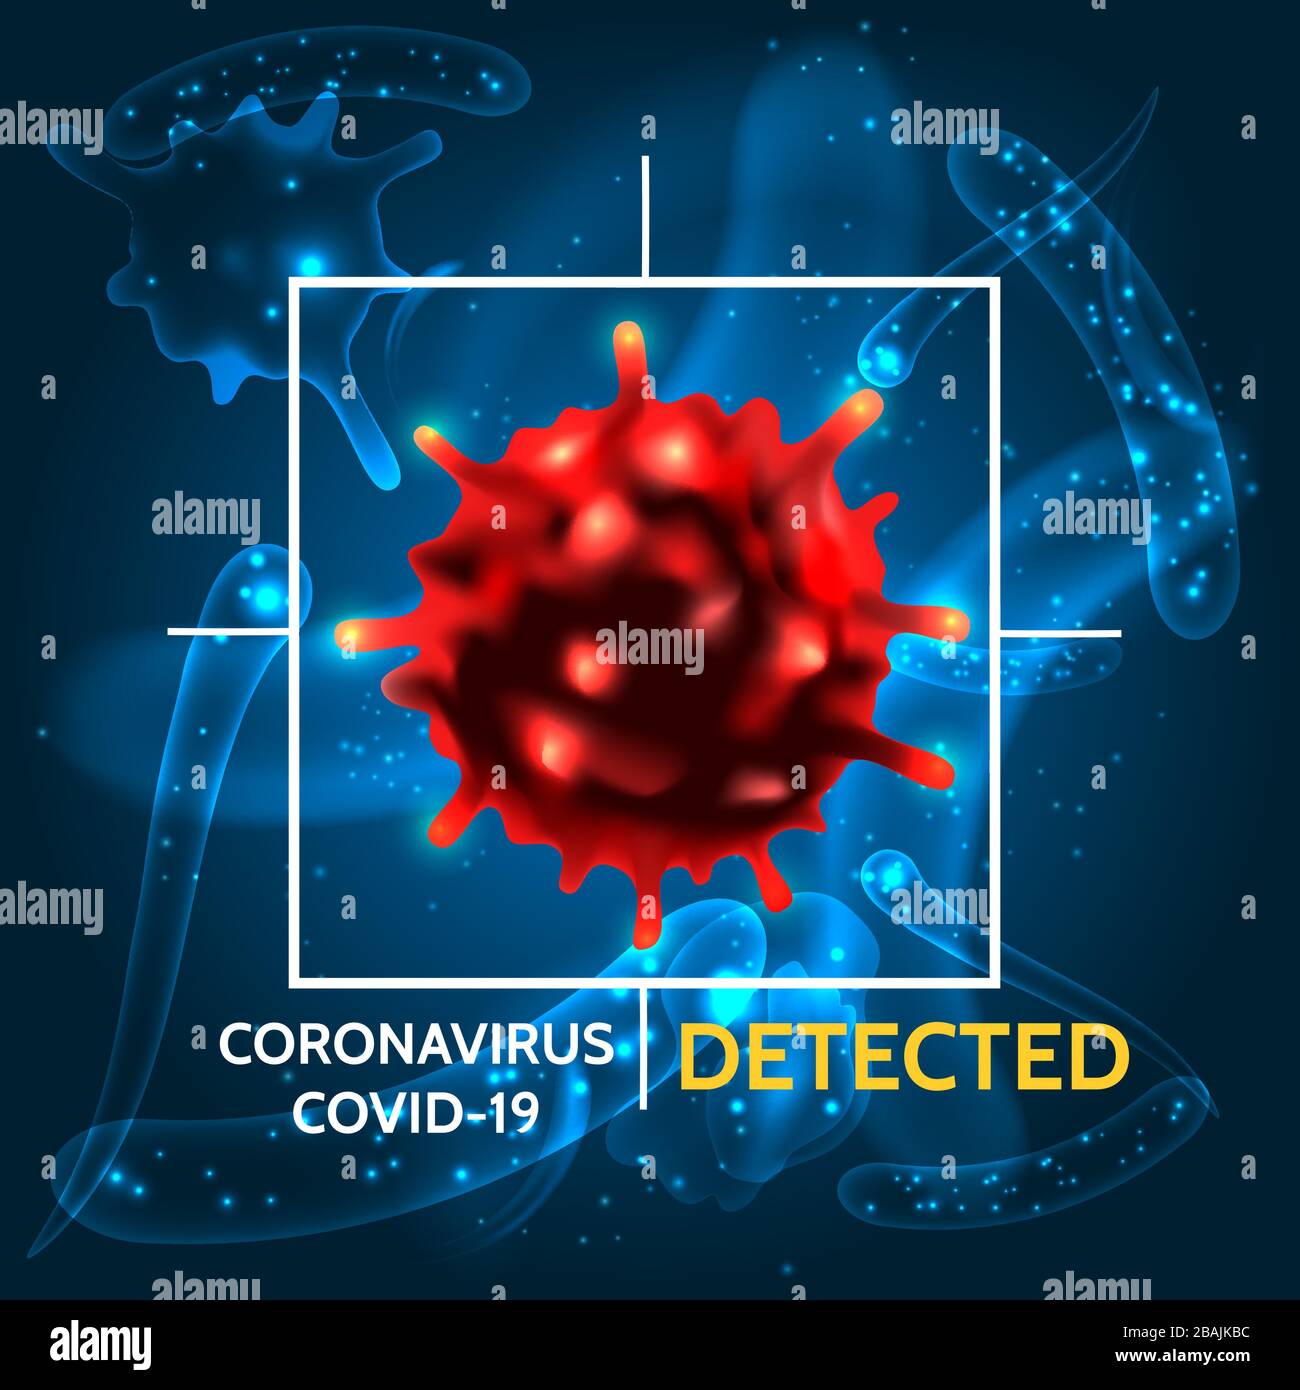 Coronavirus COVID-19 poster or banner on dark background. COVID-19 Detecting and treatment theme. Vector illustration. Stock Vector